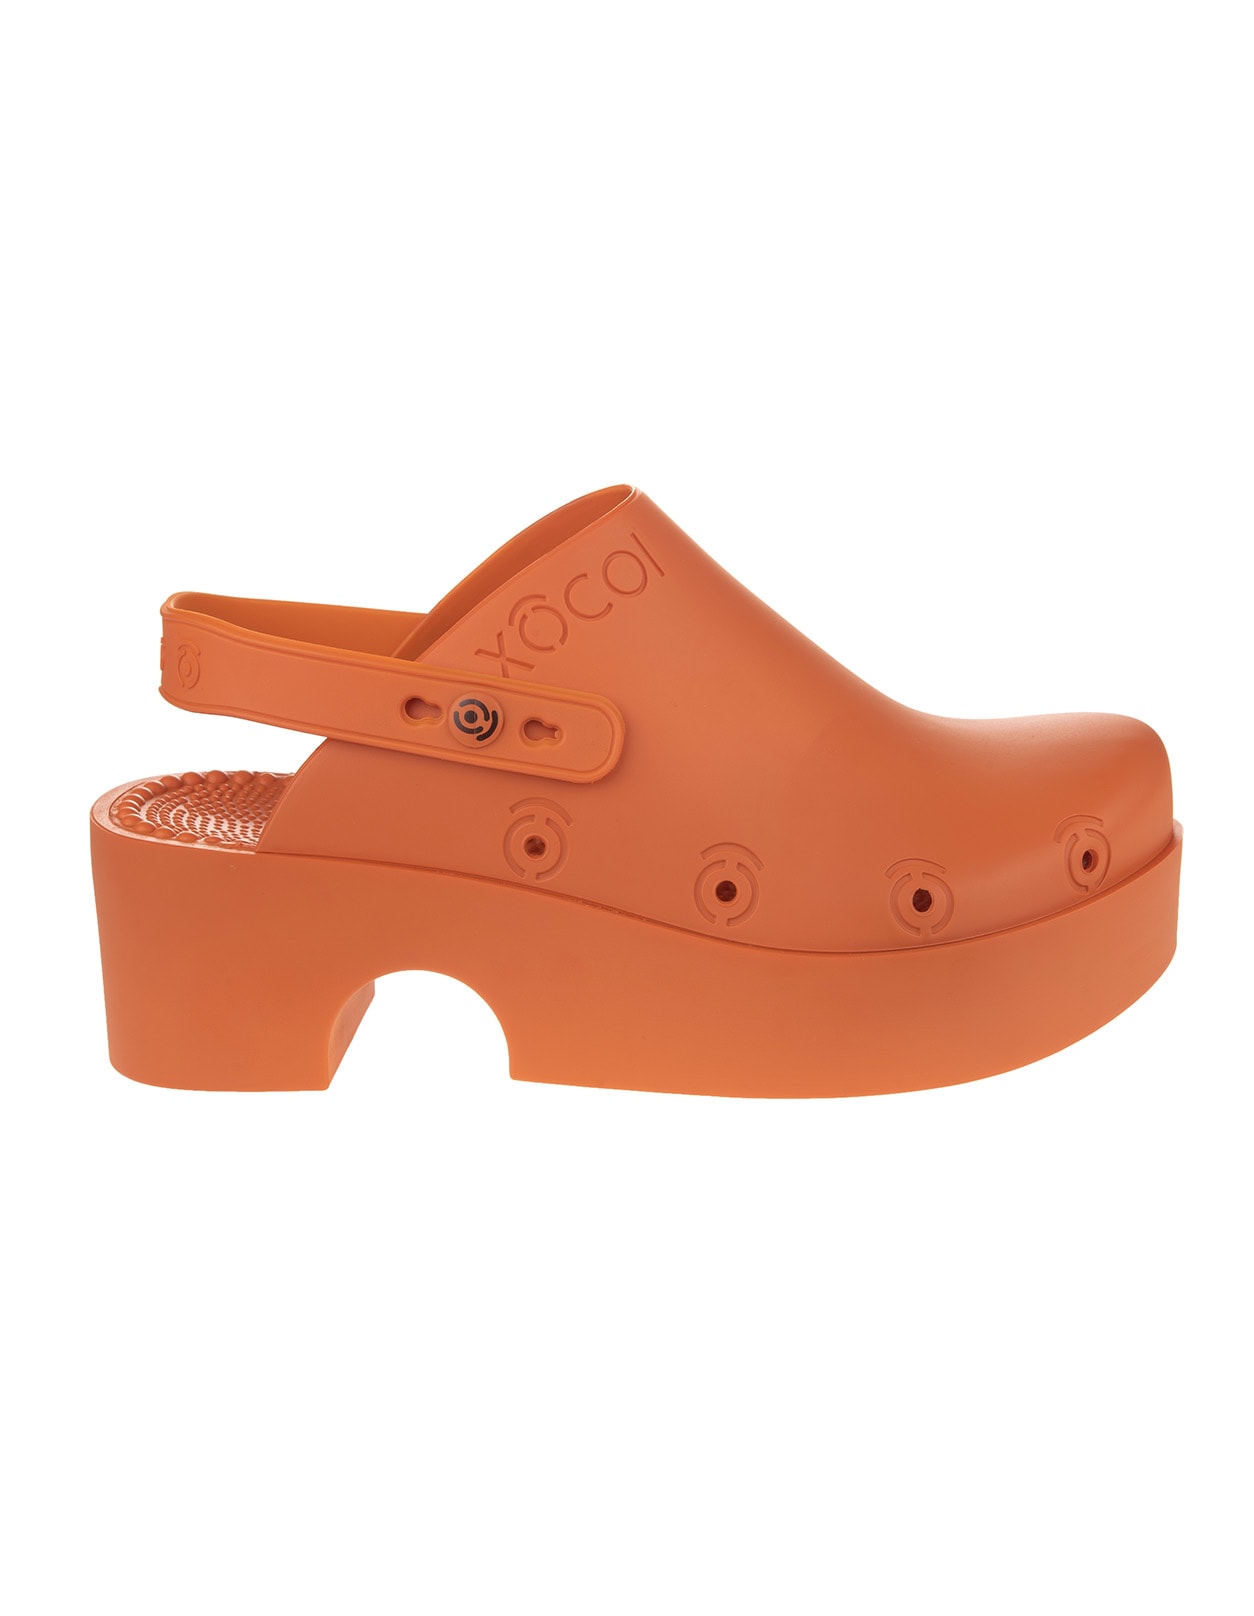 Xocoi Woman Slides In Orange Recycled Rubber With Logo